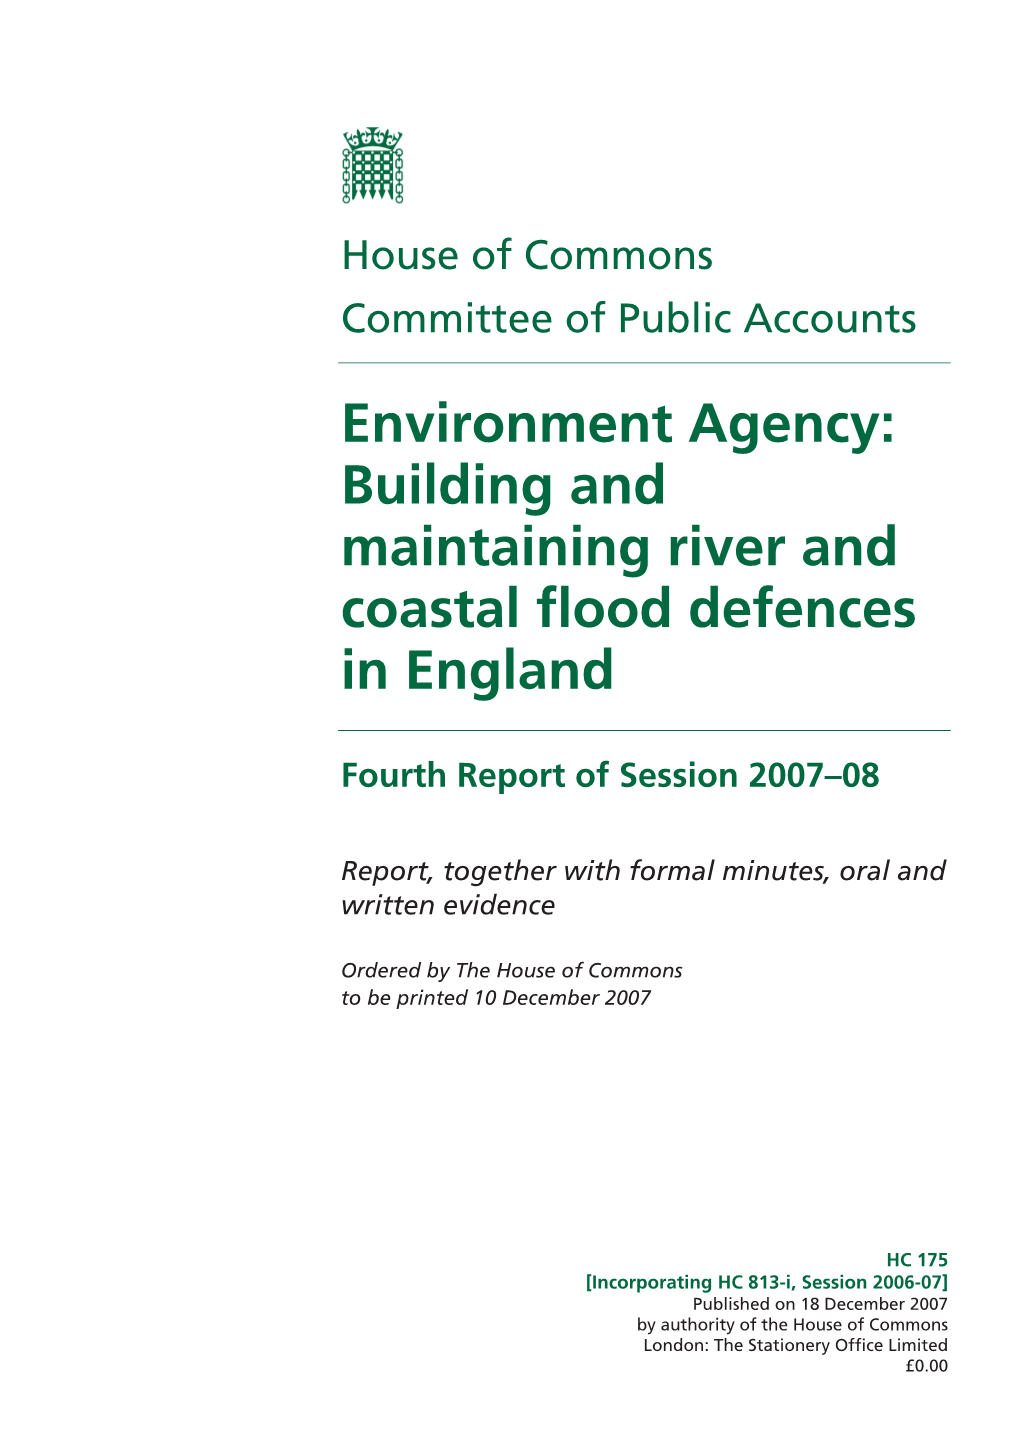 Environment Agency: Building and Maintaining River and Coastal Flood Defences in England